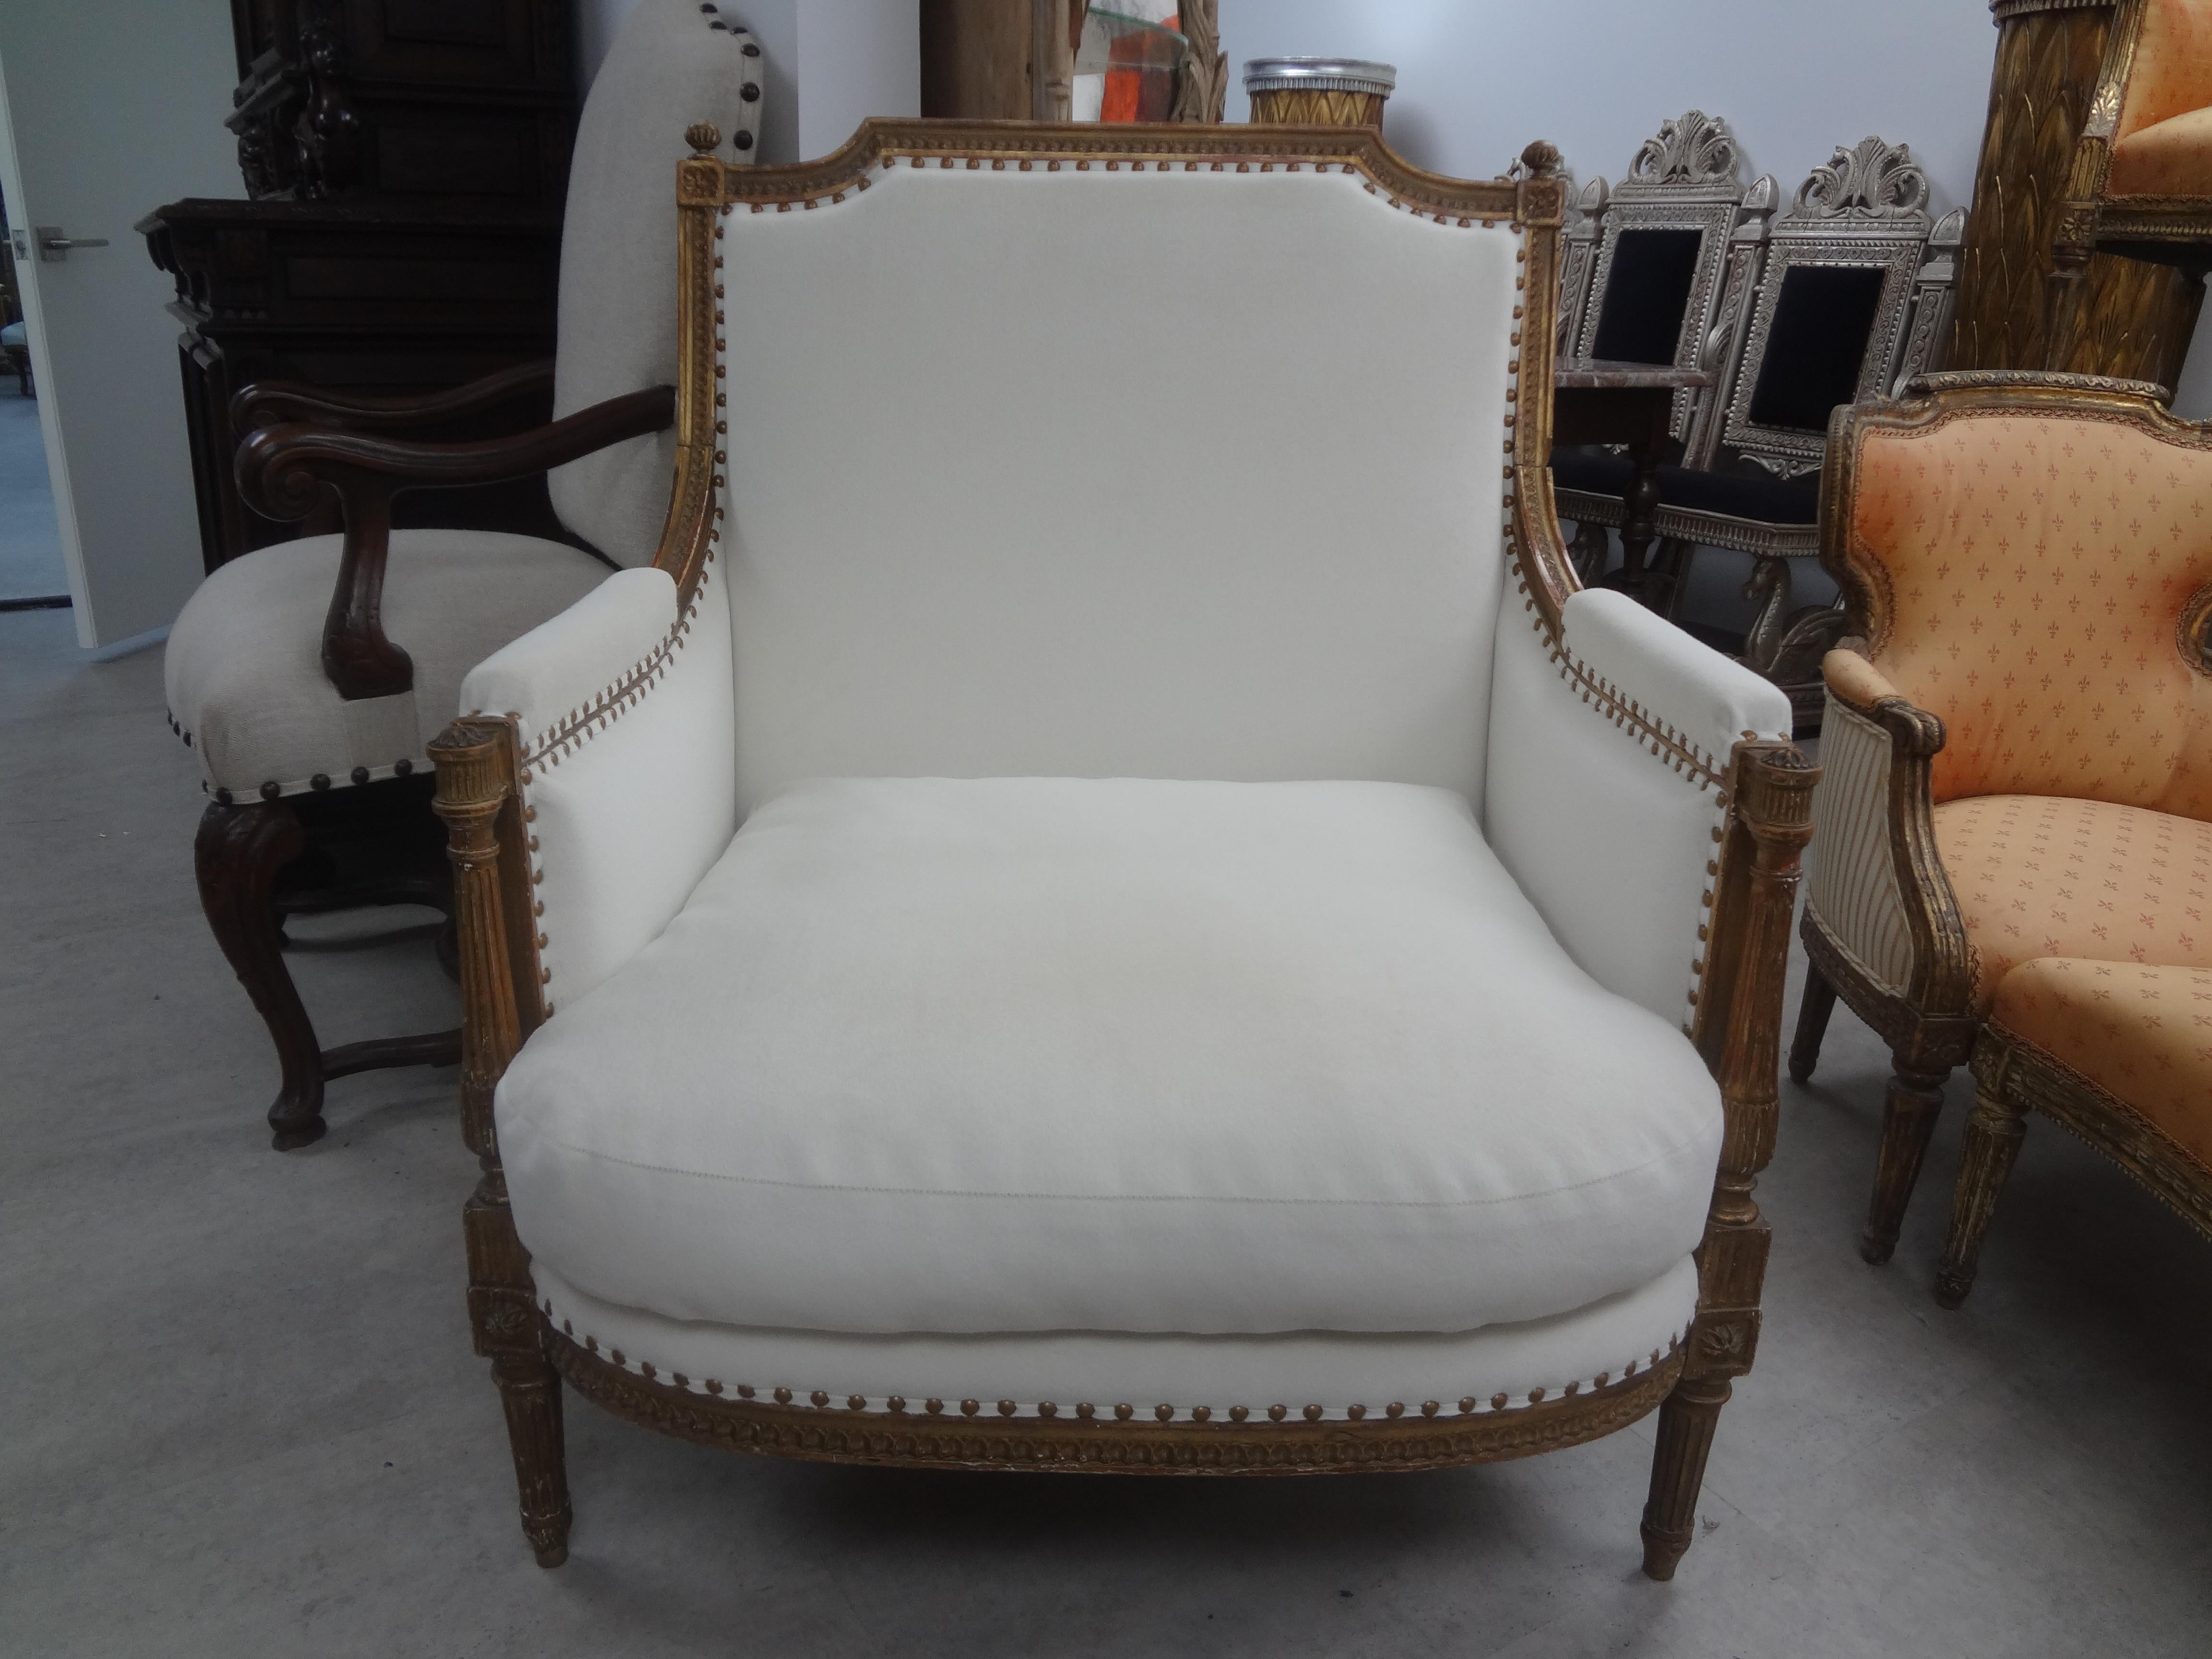 19th century French Louis XVI style giltwood marquise or bergere.
This stunning antique French Louis XVI style gilt wood marquise, loveseat, bergere or chair is most comfortable. It has been newly upholstered with a down cushion in a plush neutral